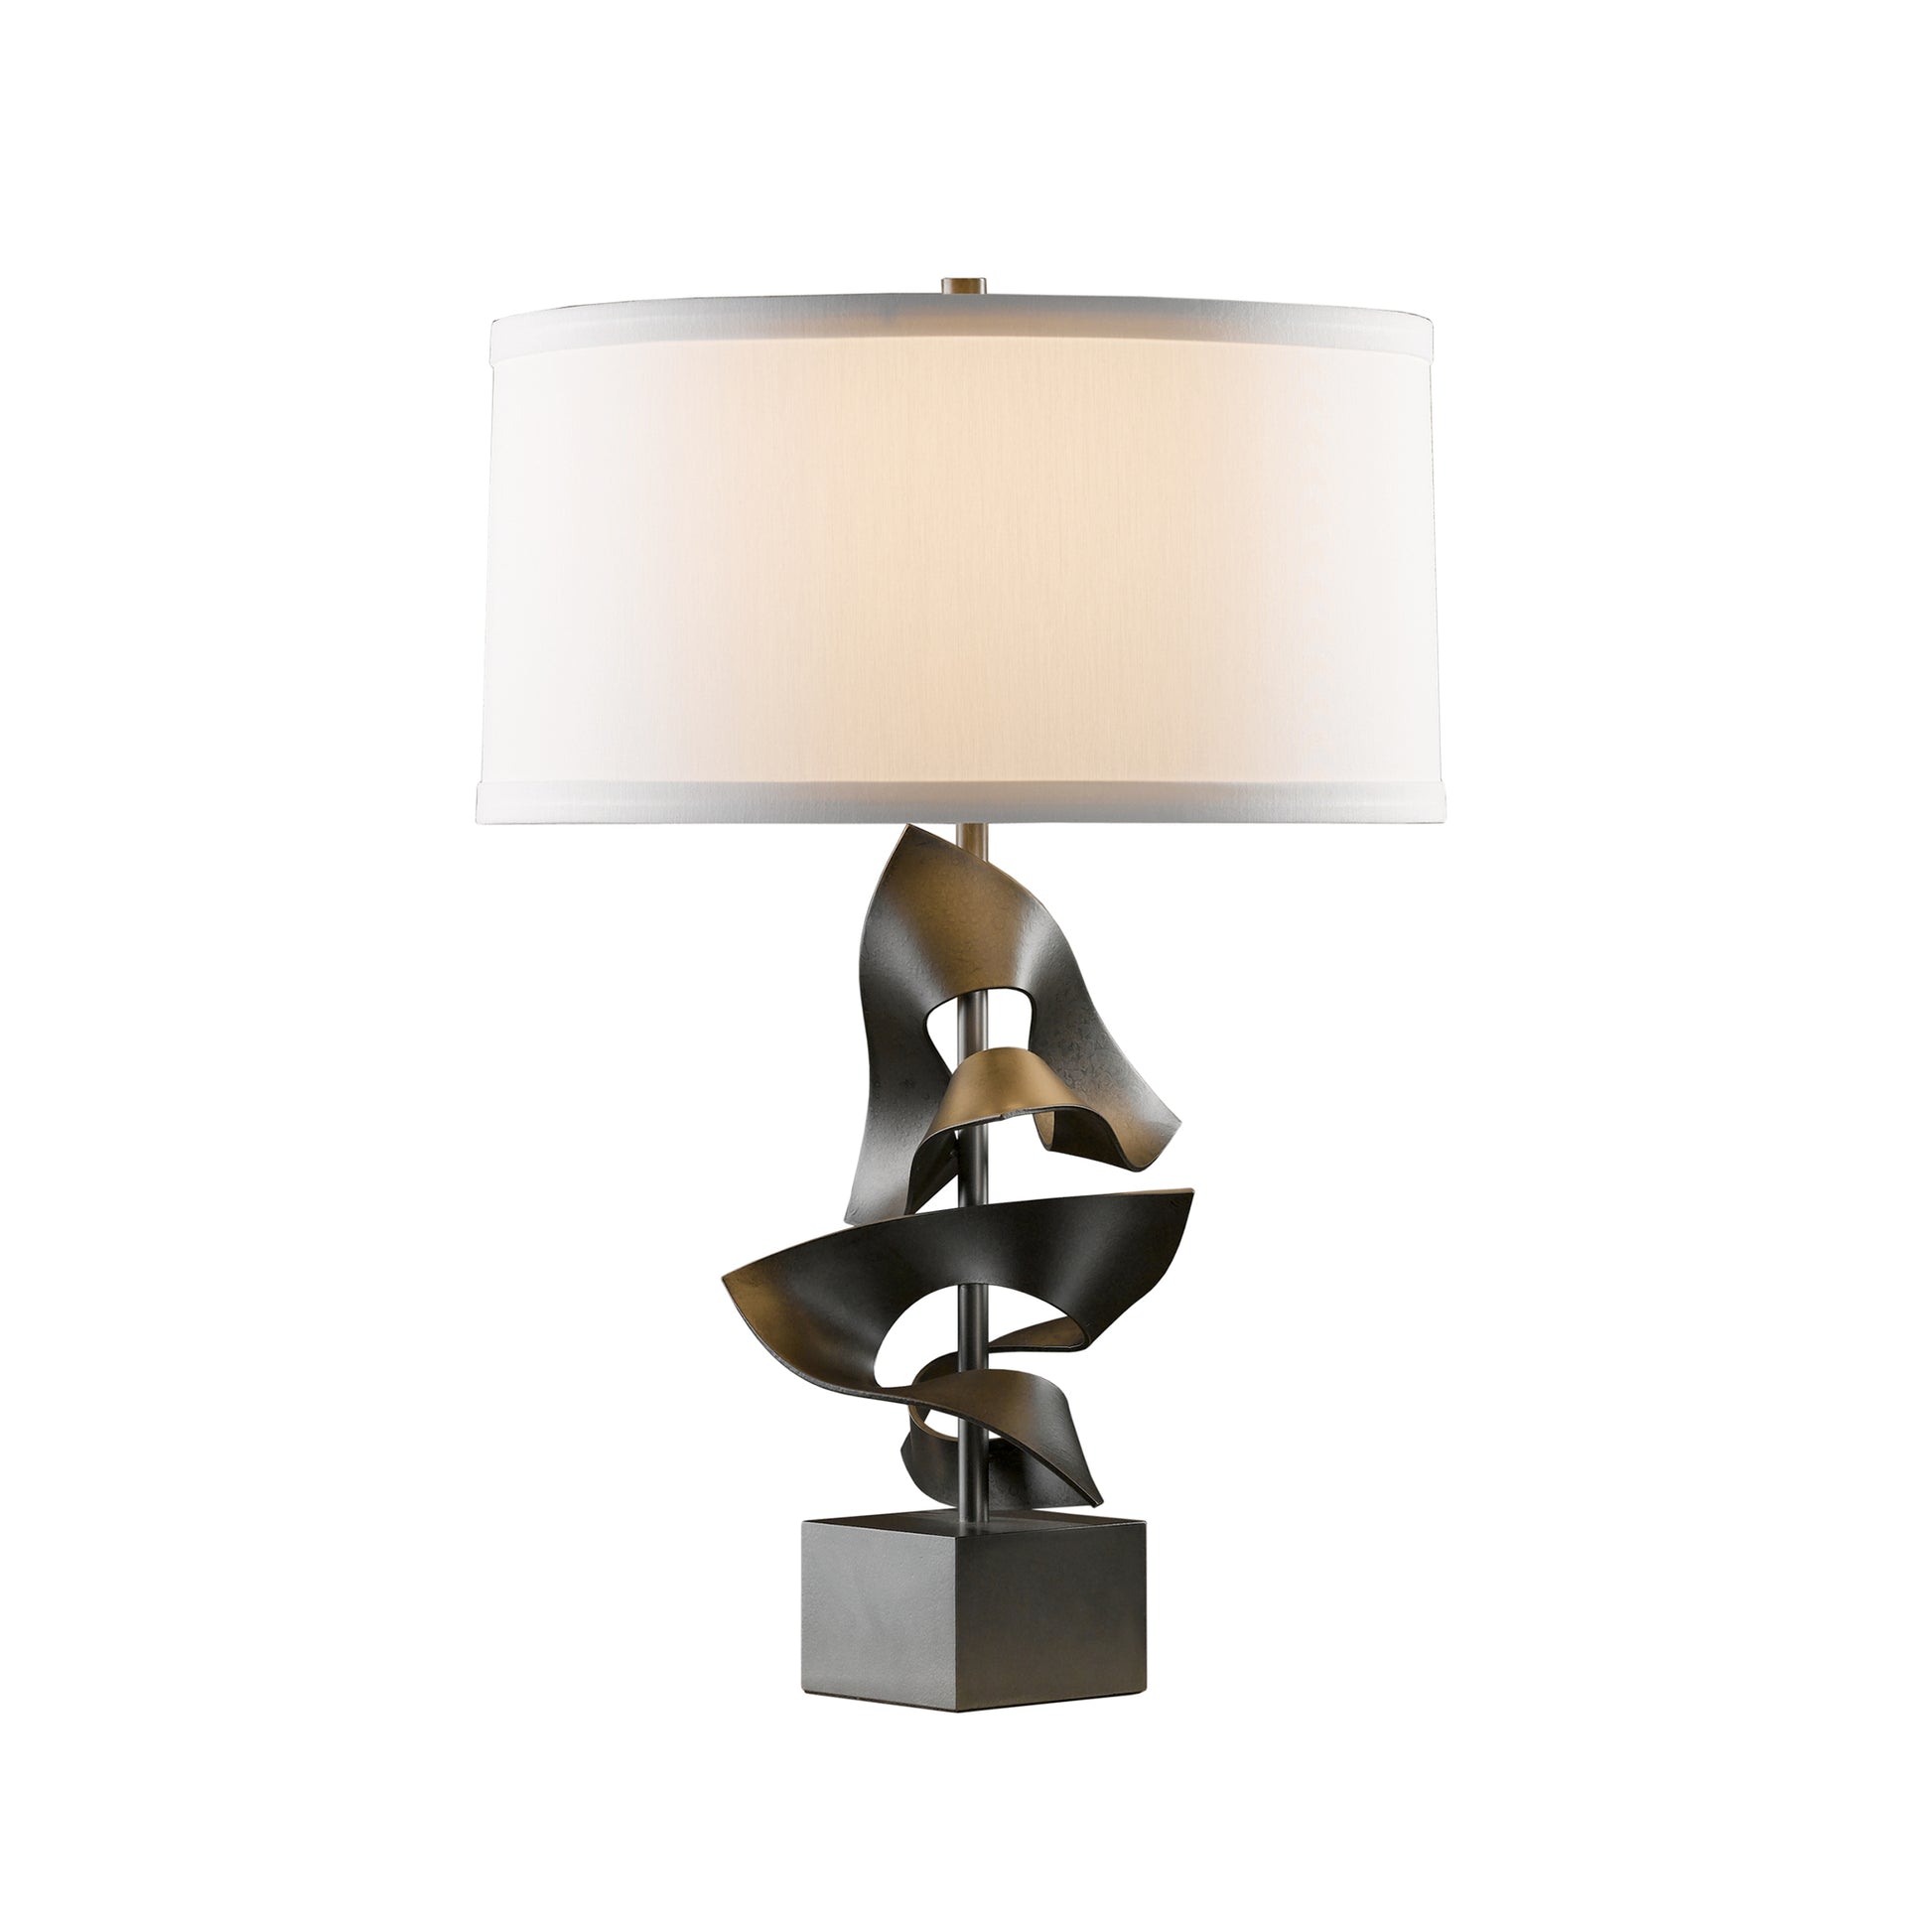 A modern Hubbardton Forge Gallery Two Fold Table Lamp with a sculptural, spiraling handcrafted metal base in a dark finish, supporting a horizontal, rectangular, off-white lampshade, isolated on a white background.